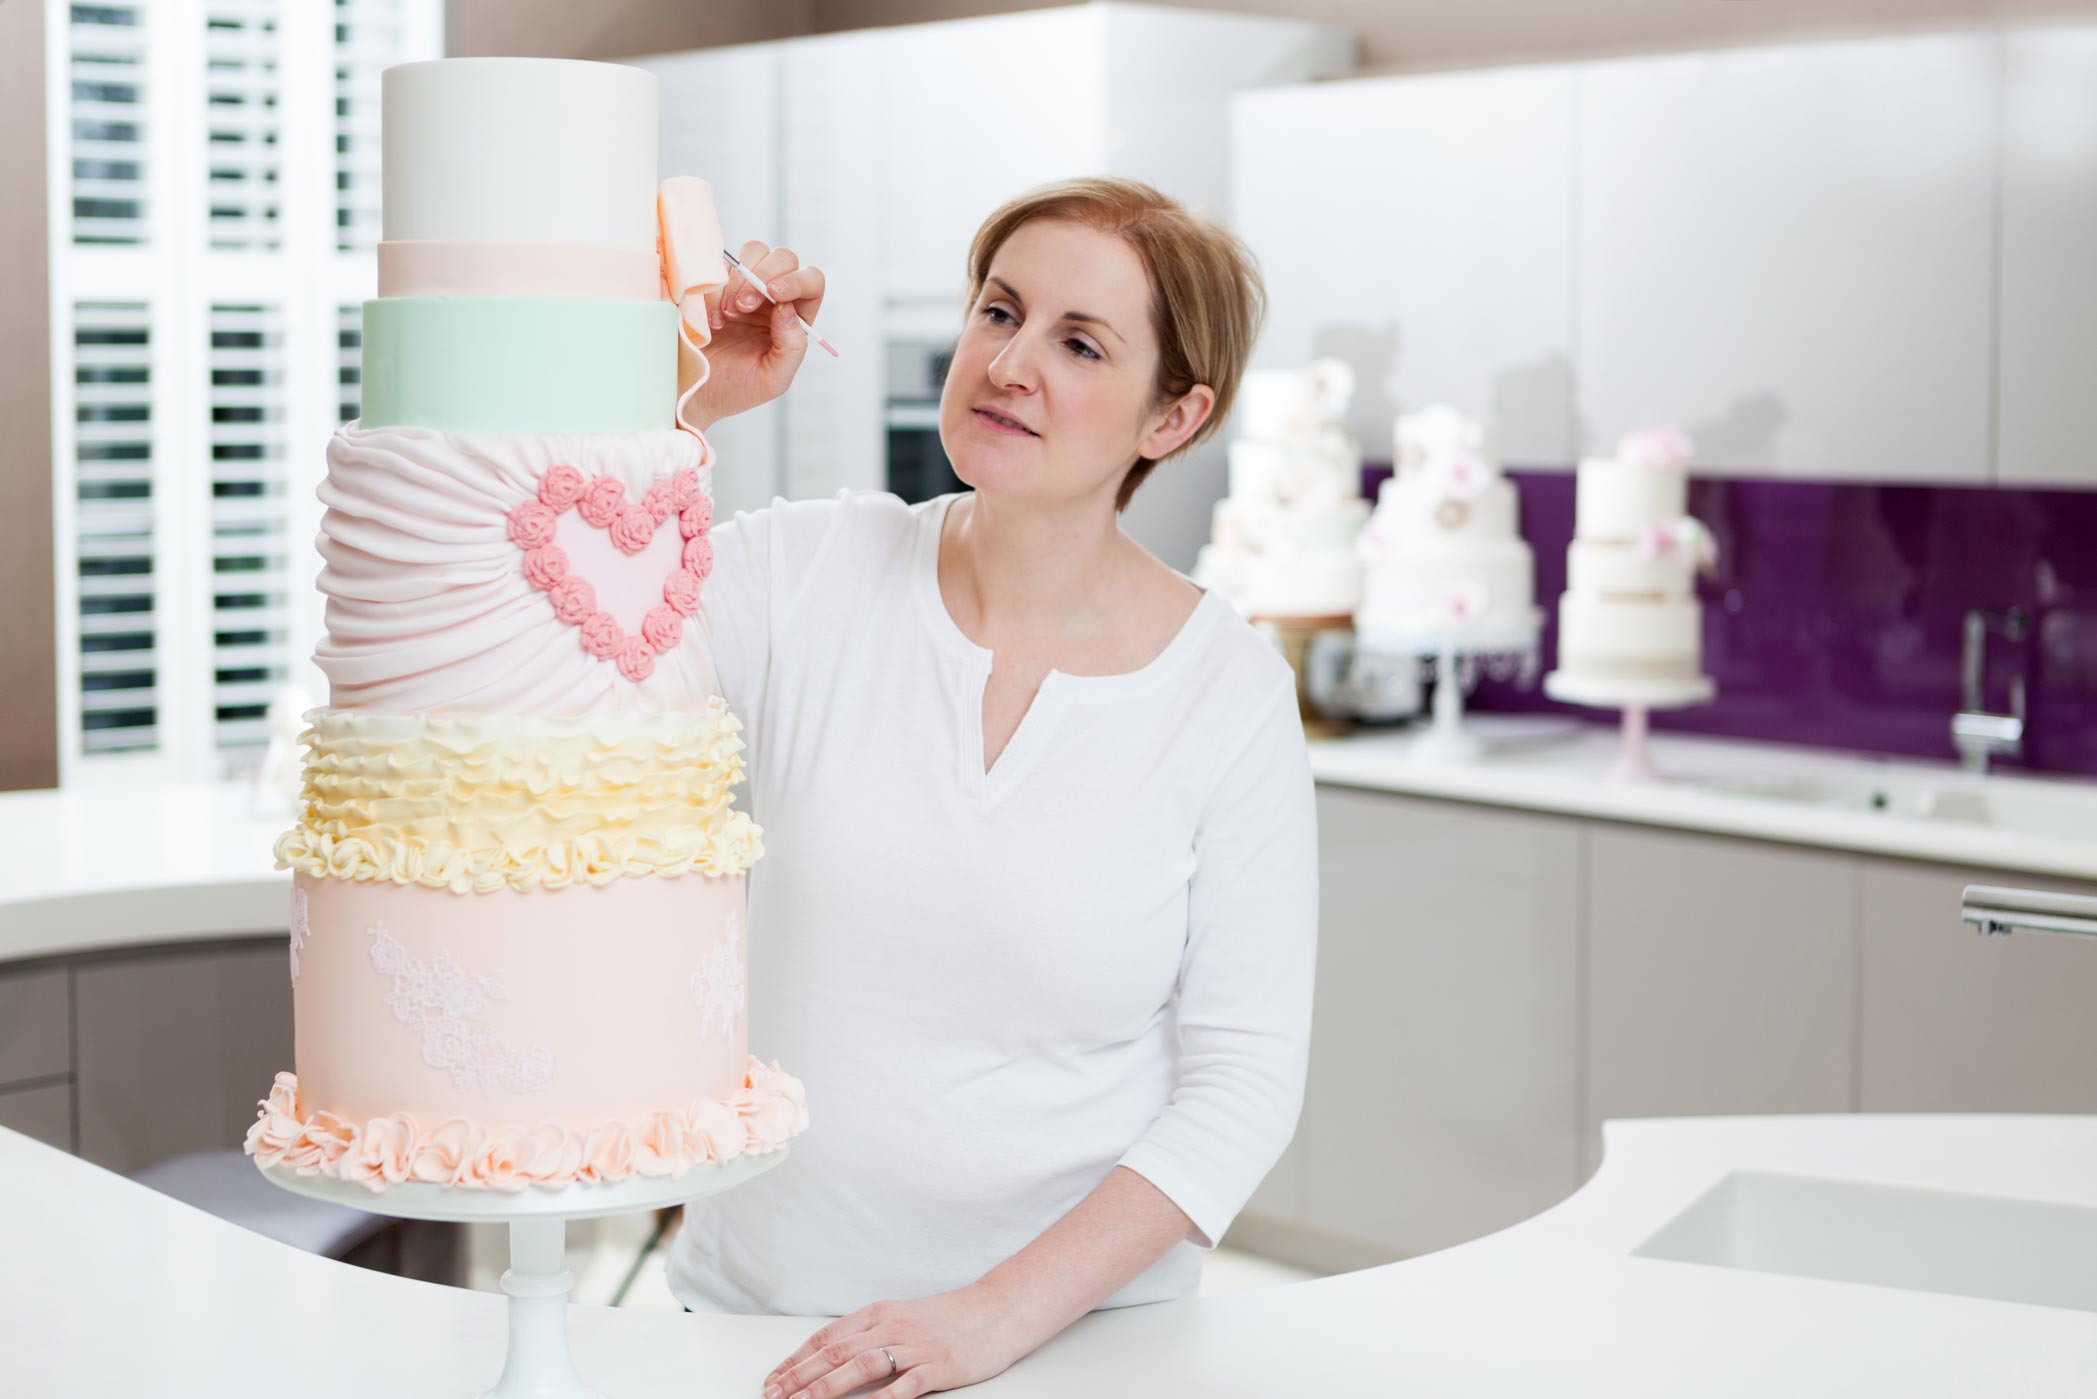 A woman decorates a wedding cake during her Surrey personal branding photography shoot